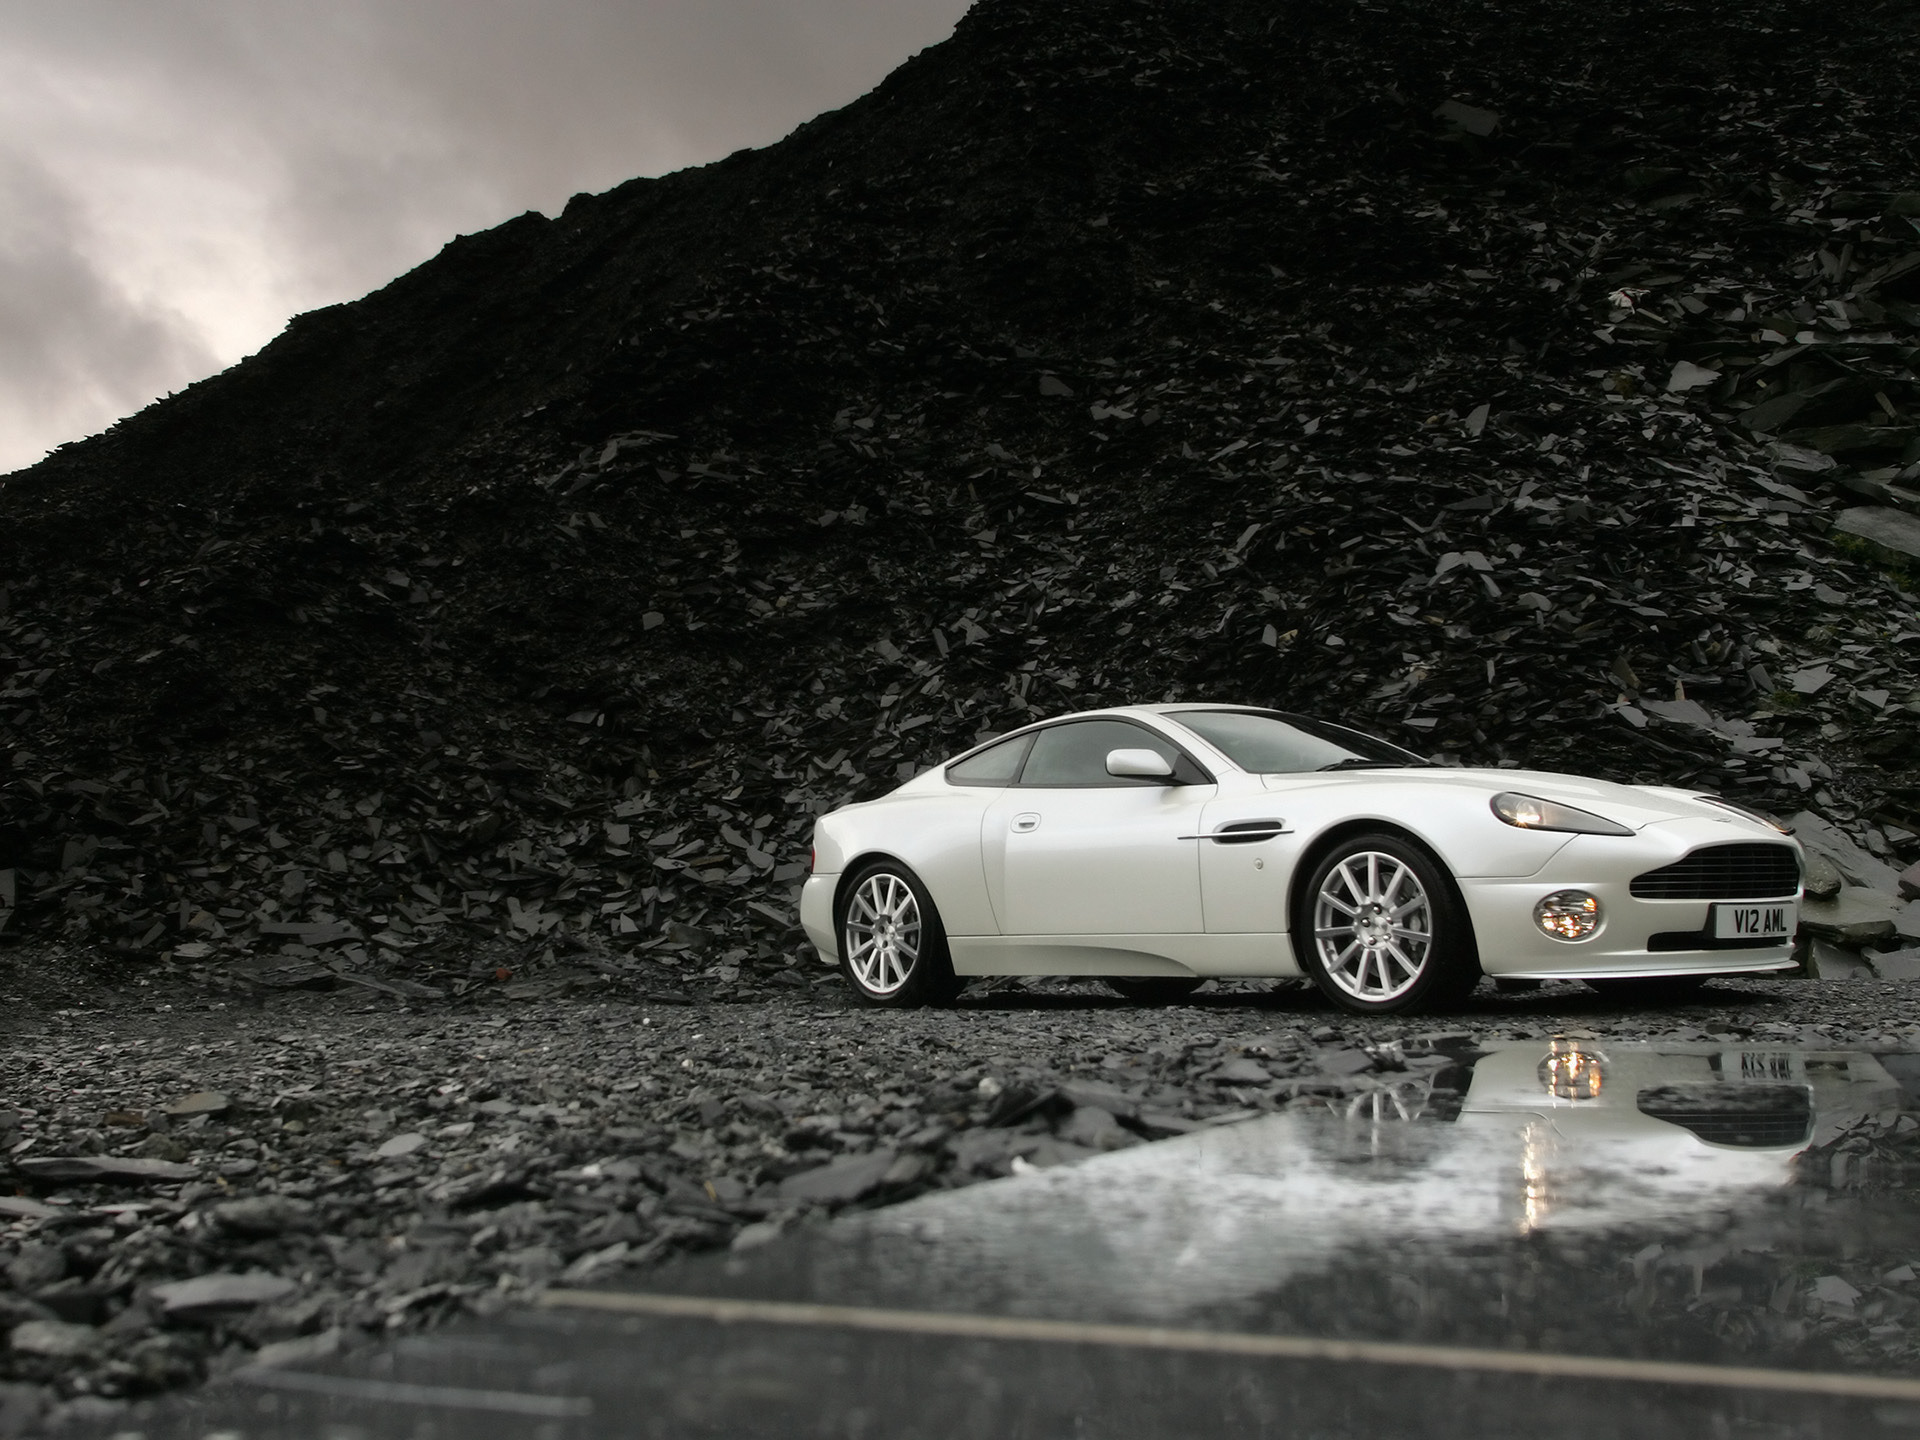 Aston Martin Vanquish Wallpapers Pictures Images